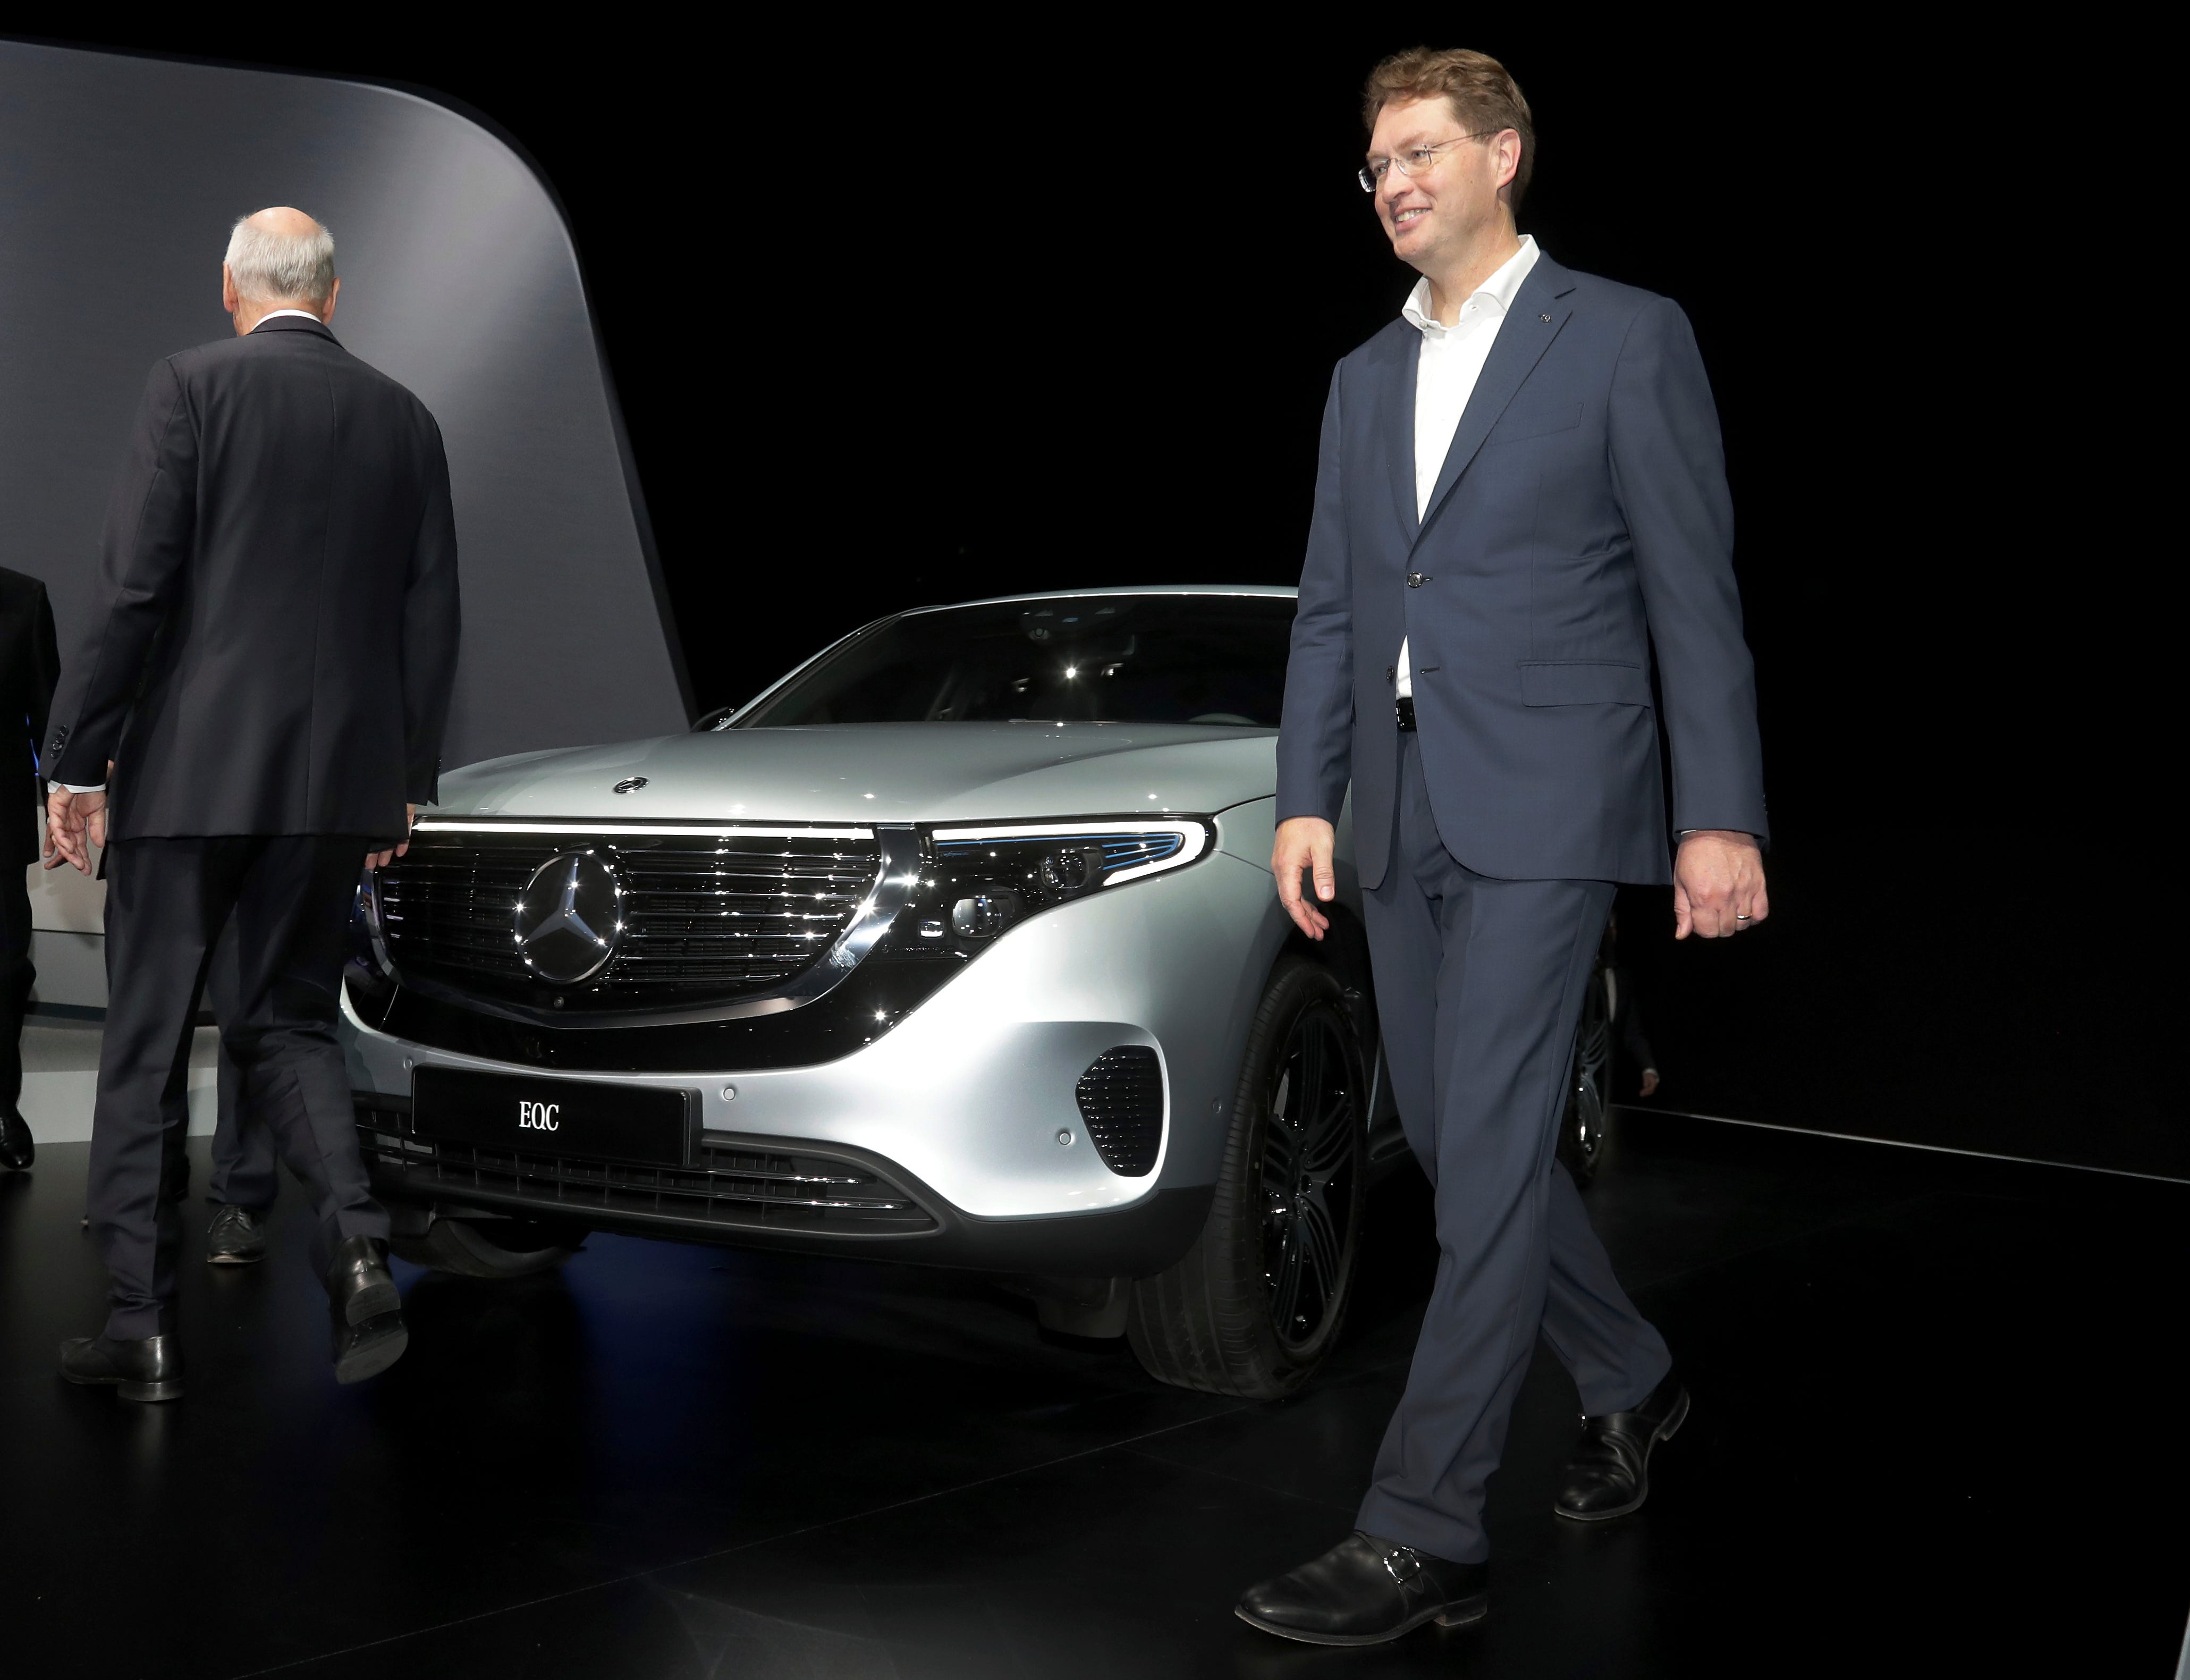 Daimler CEO Dieter Zetsche, left, and incoming Daimler CEO Ola Kaellenius, right, walk past a Mercedes car prior to the annual shareholder meeting of the car manufacturer Daimler in Berlin, Germany, Wednesday, May 22, 2019.